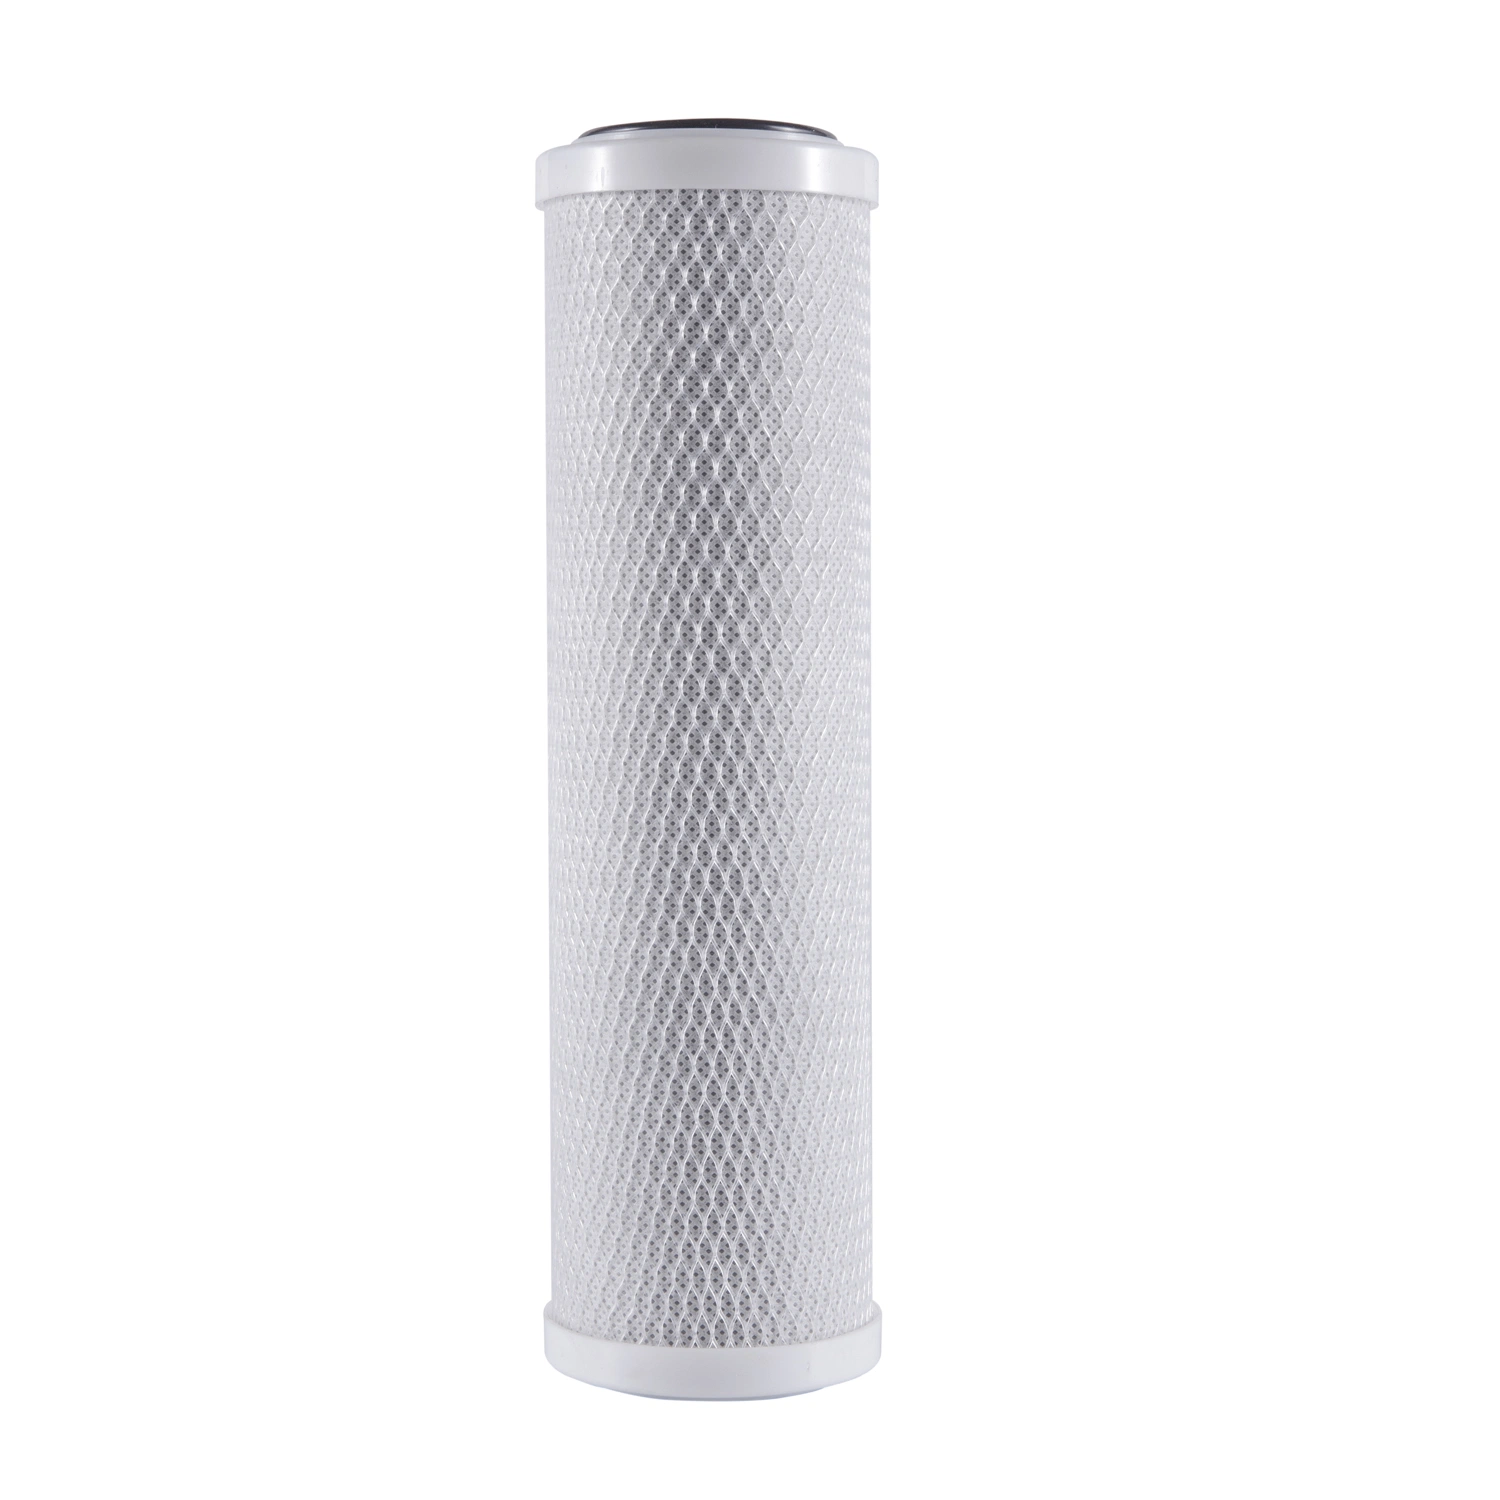 30 Compressed Active Carbon Filter Cartridge for Water